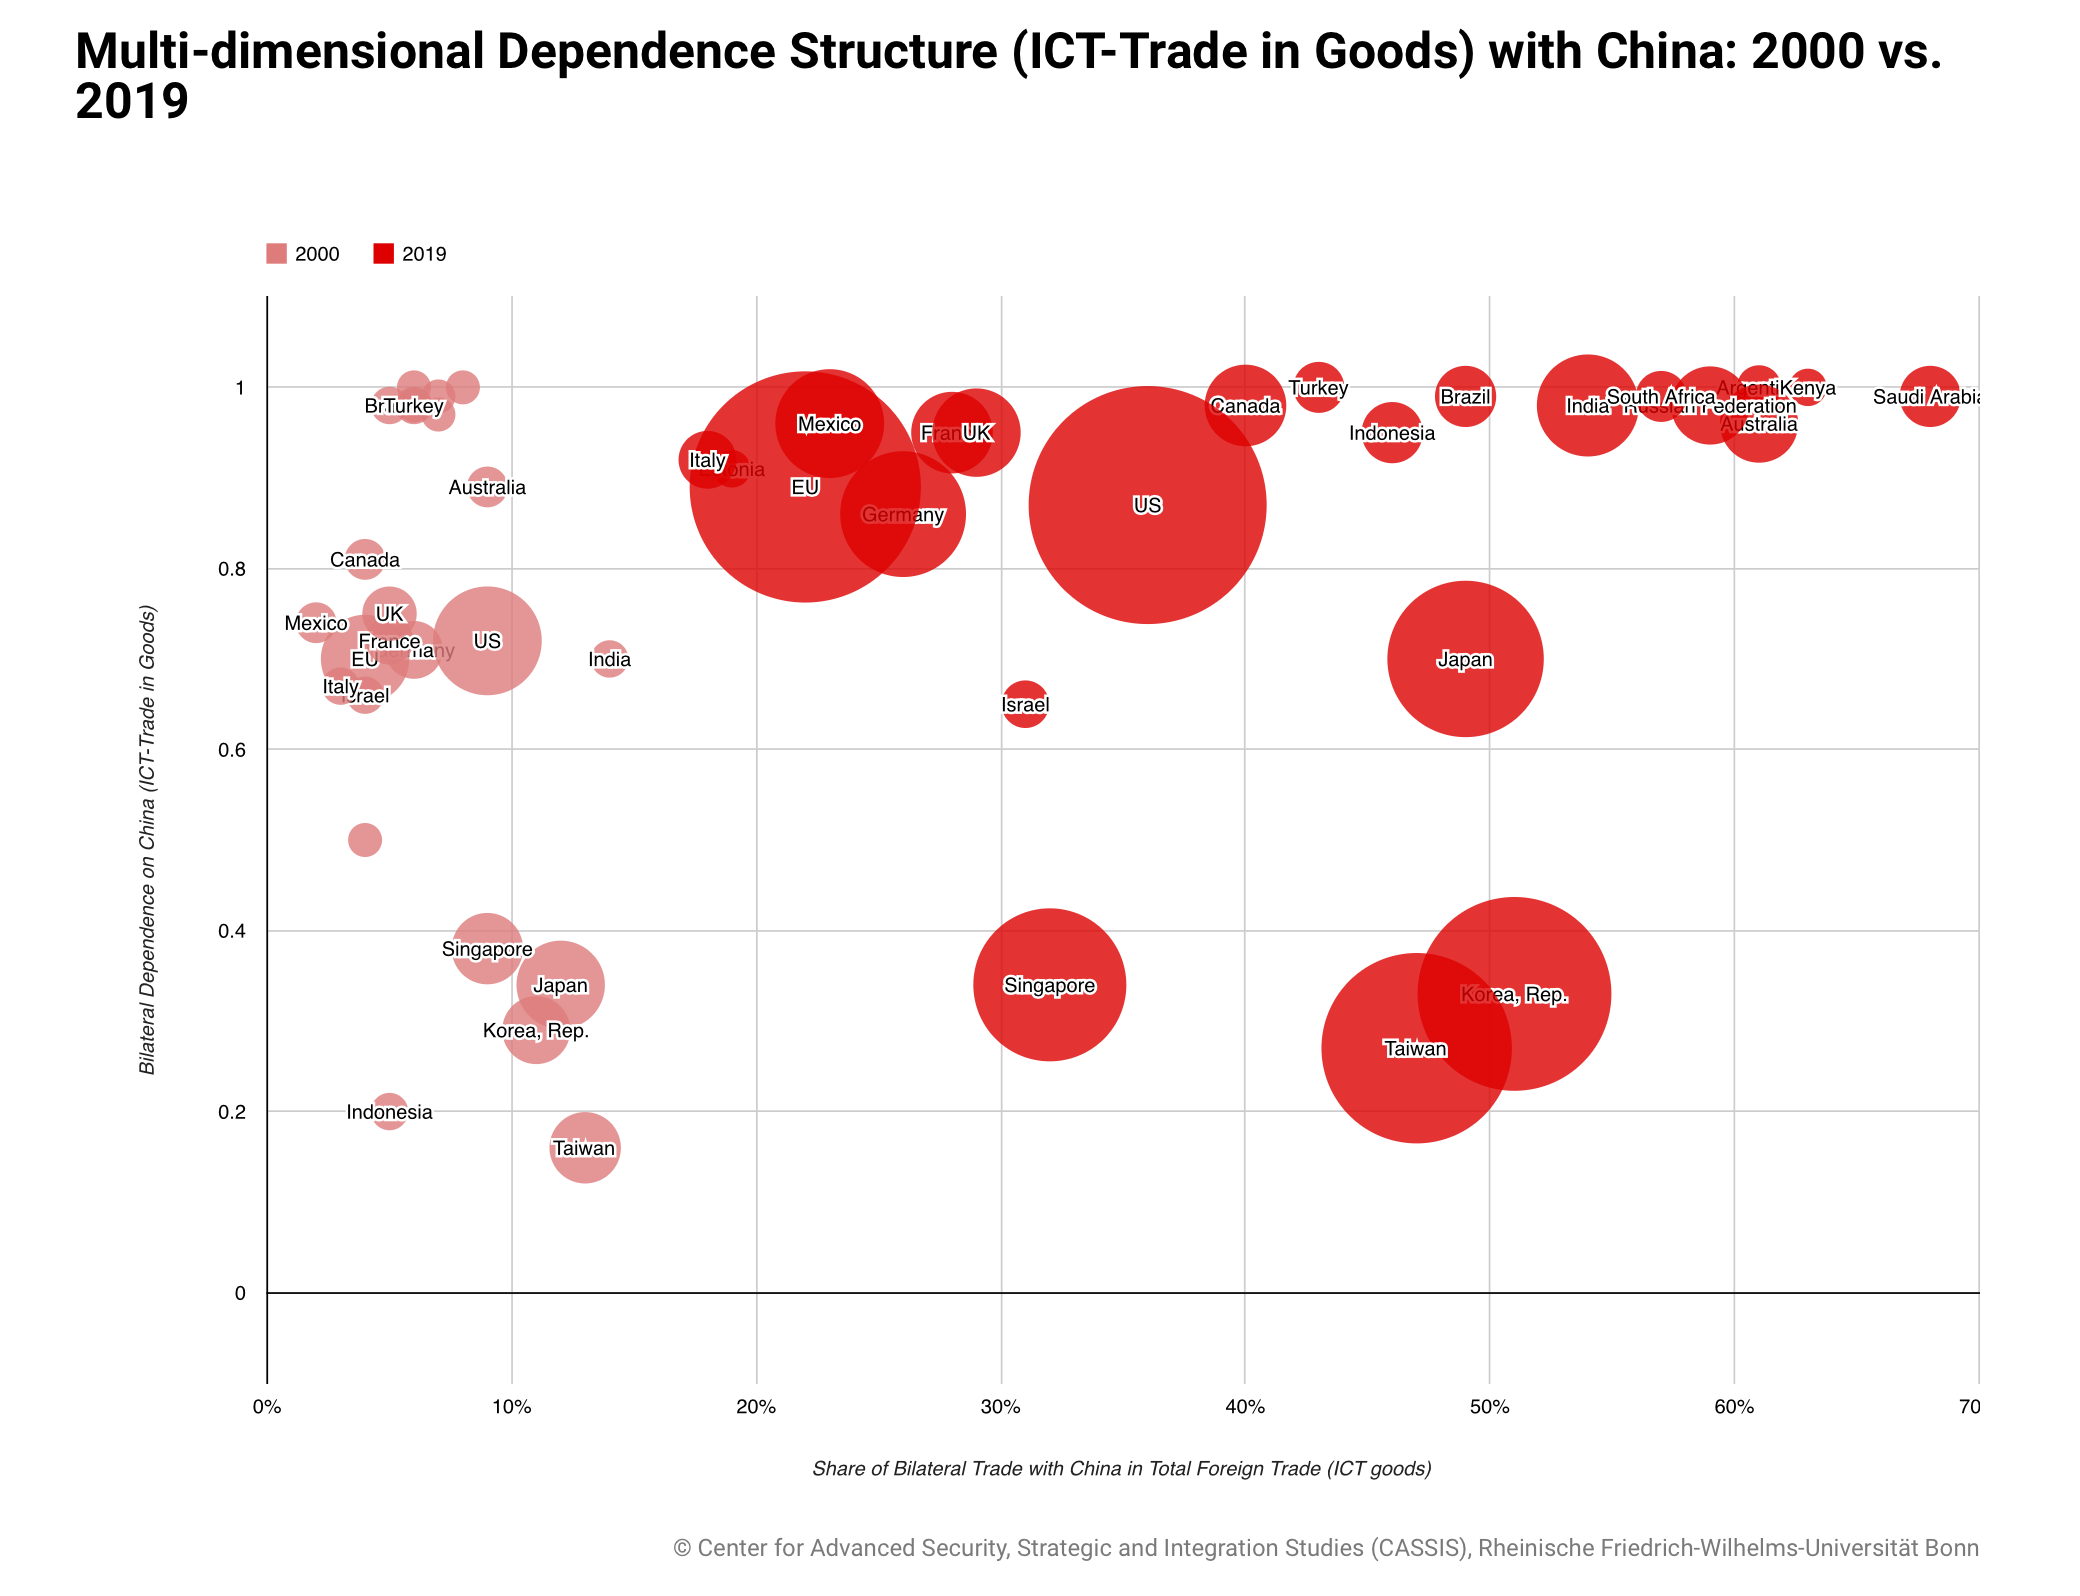 Multi-dimensional Dependence Structure (ICT-Trade in Goods) with China 2000 vs. 2019